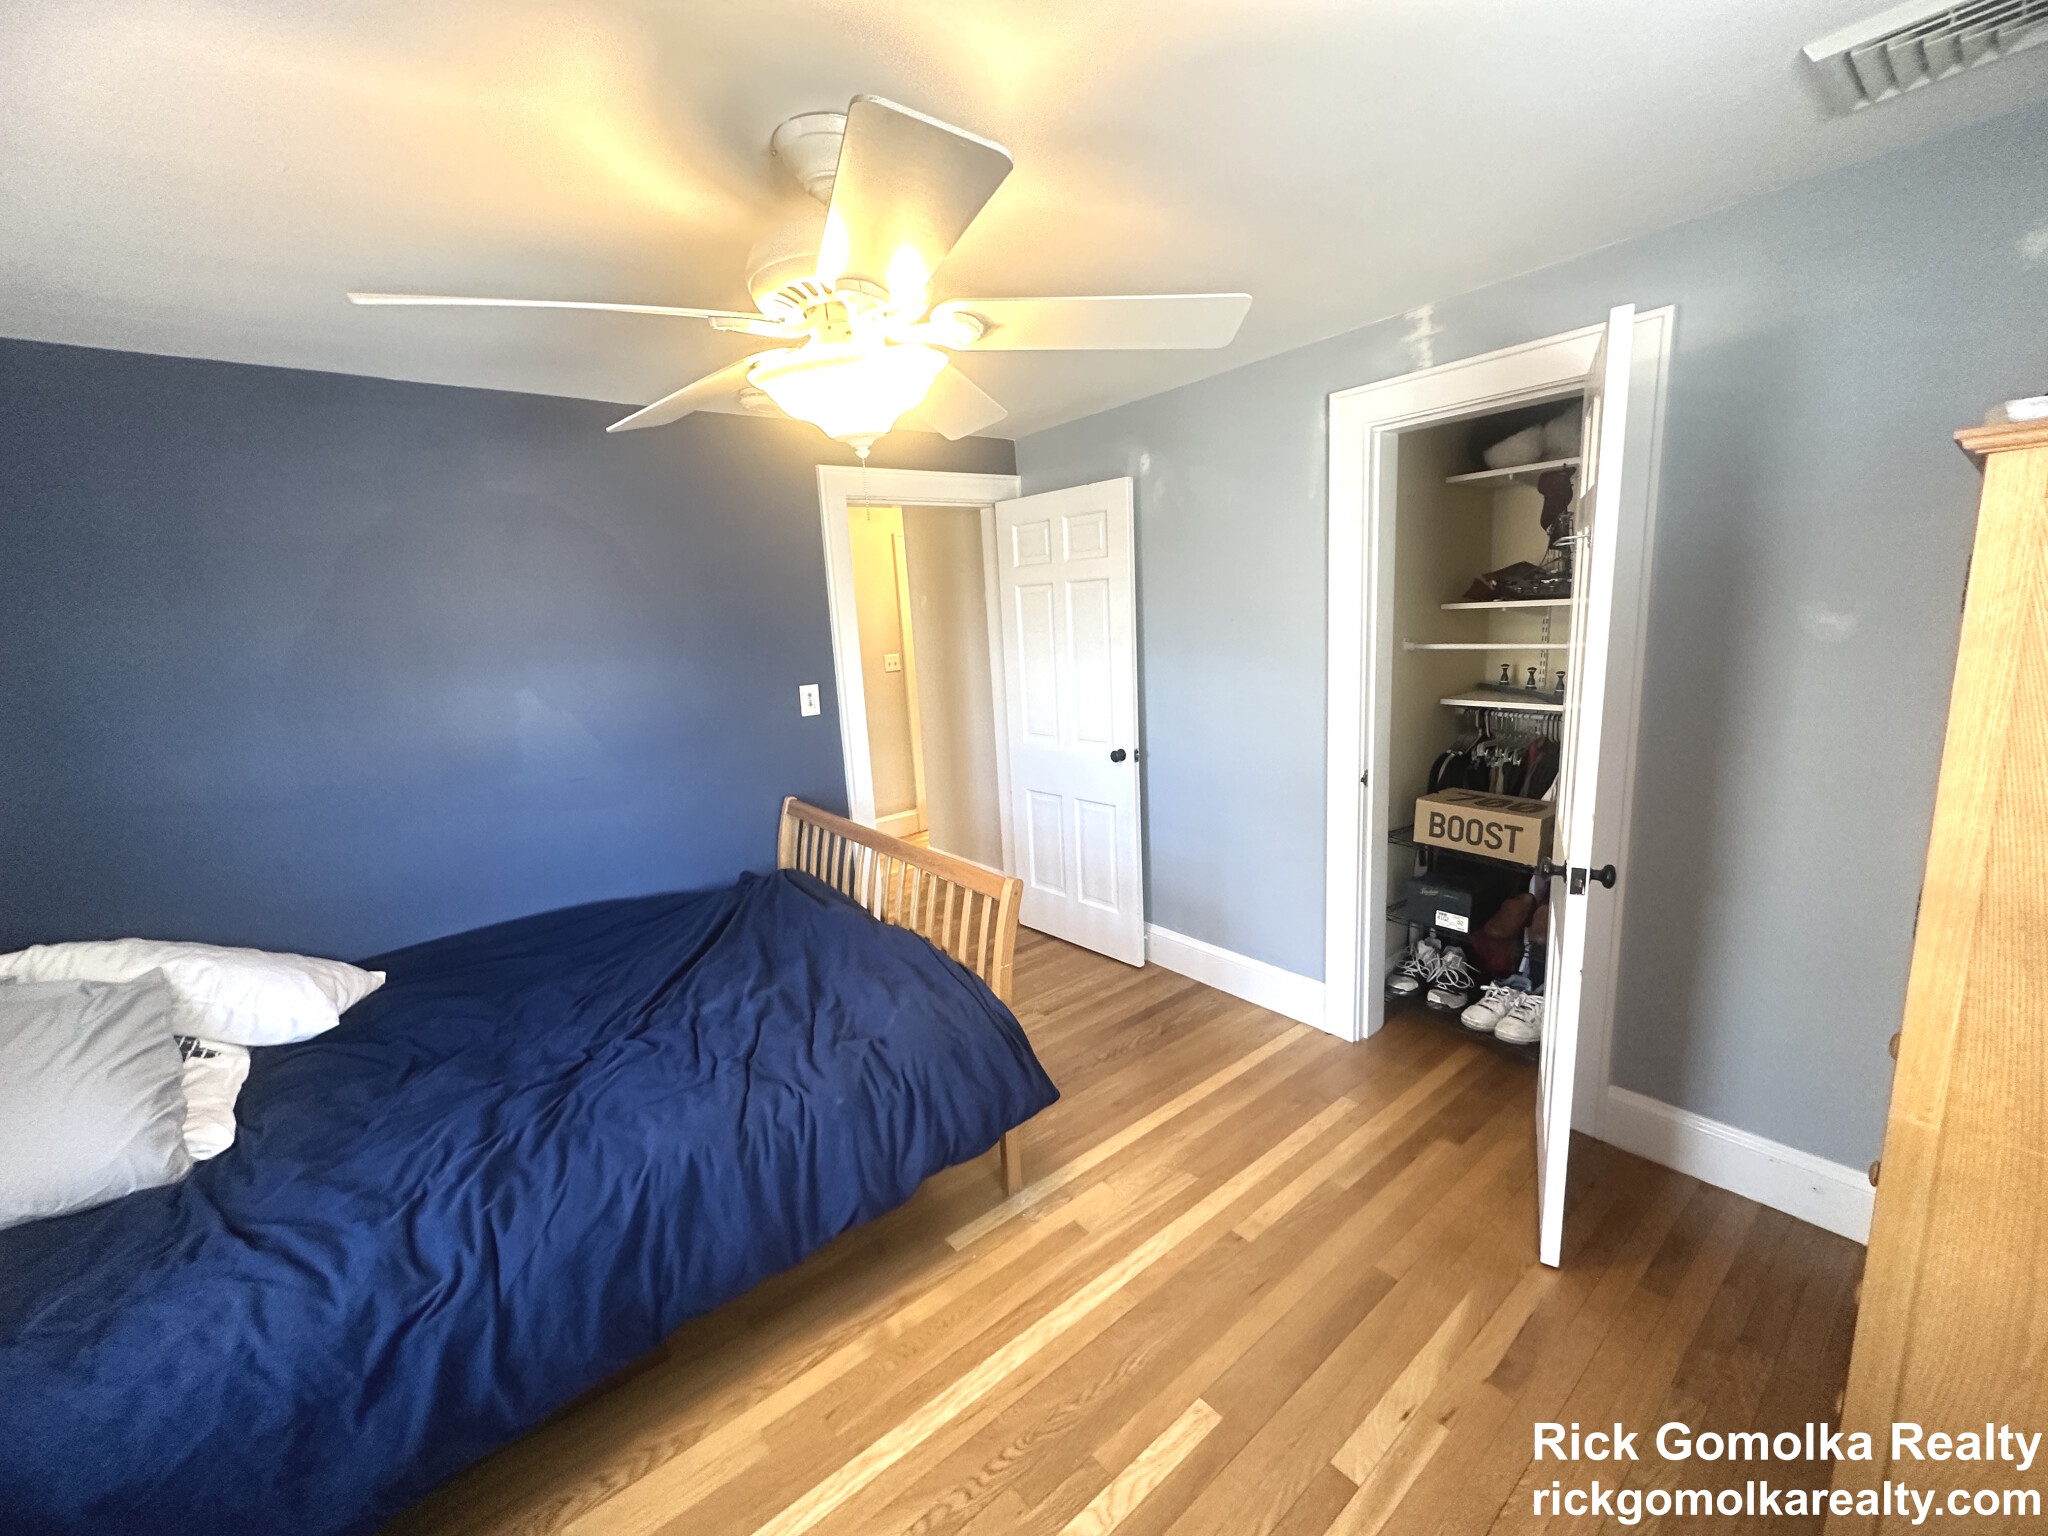 Photos of apartment on Florence Rd.,Waltham MA 02453